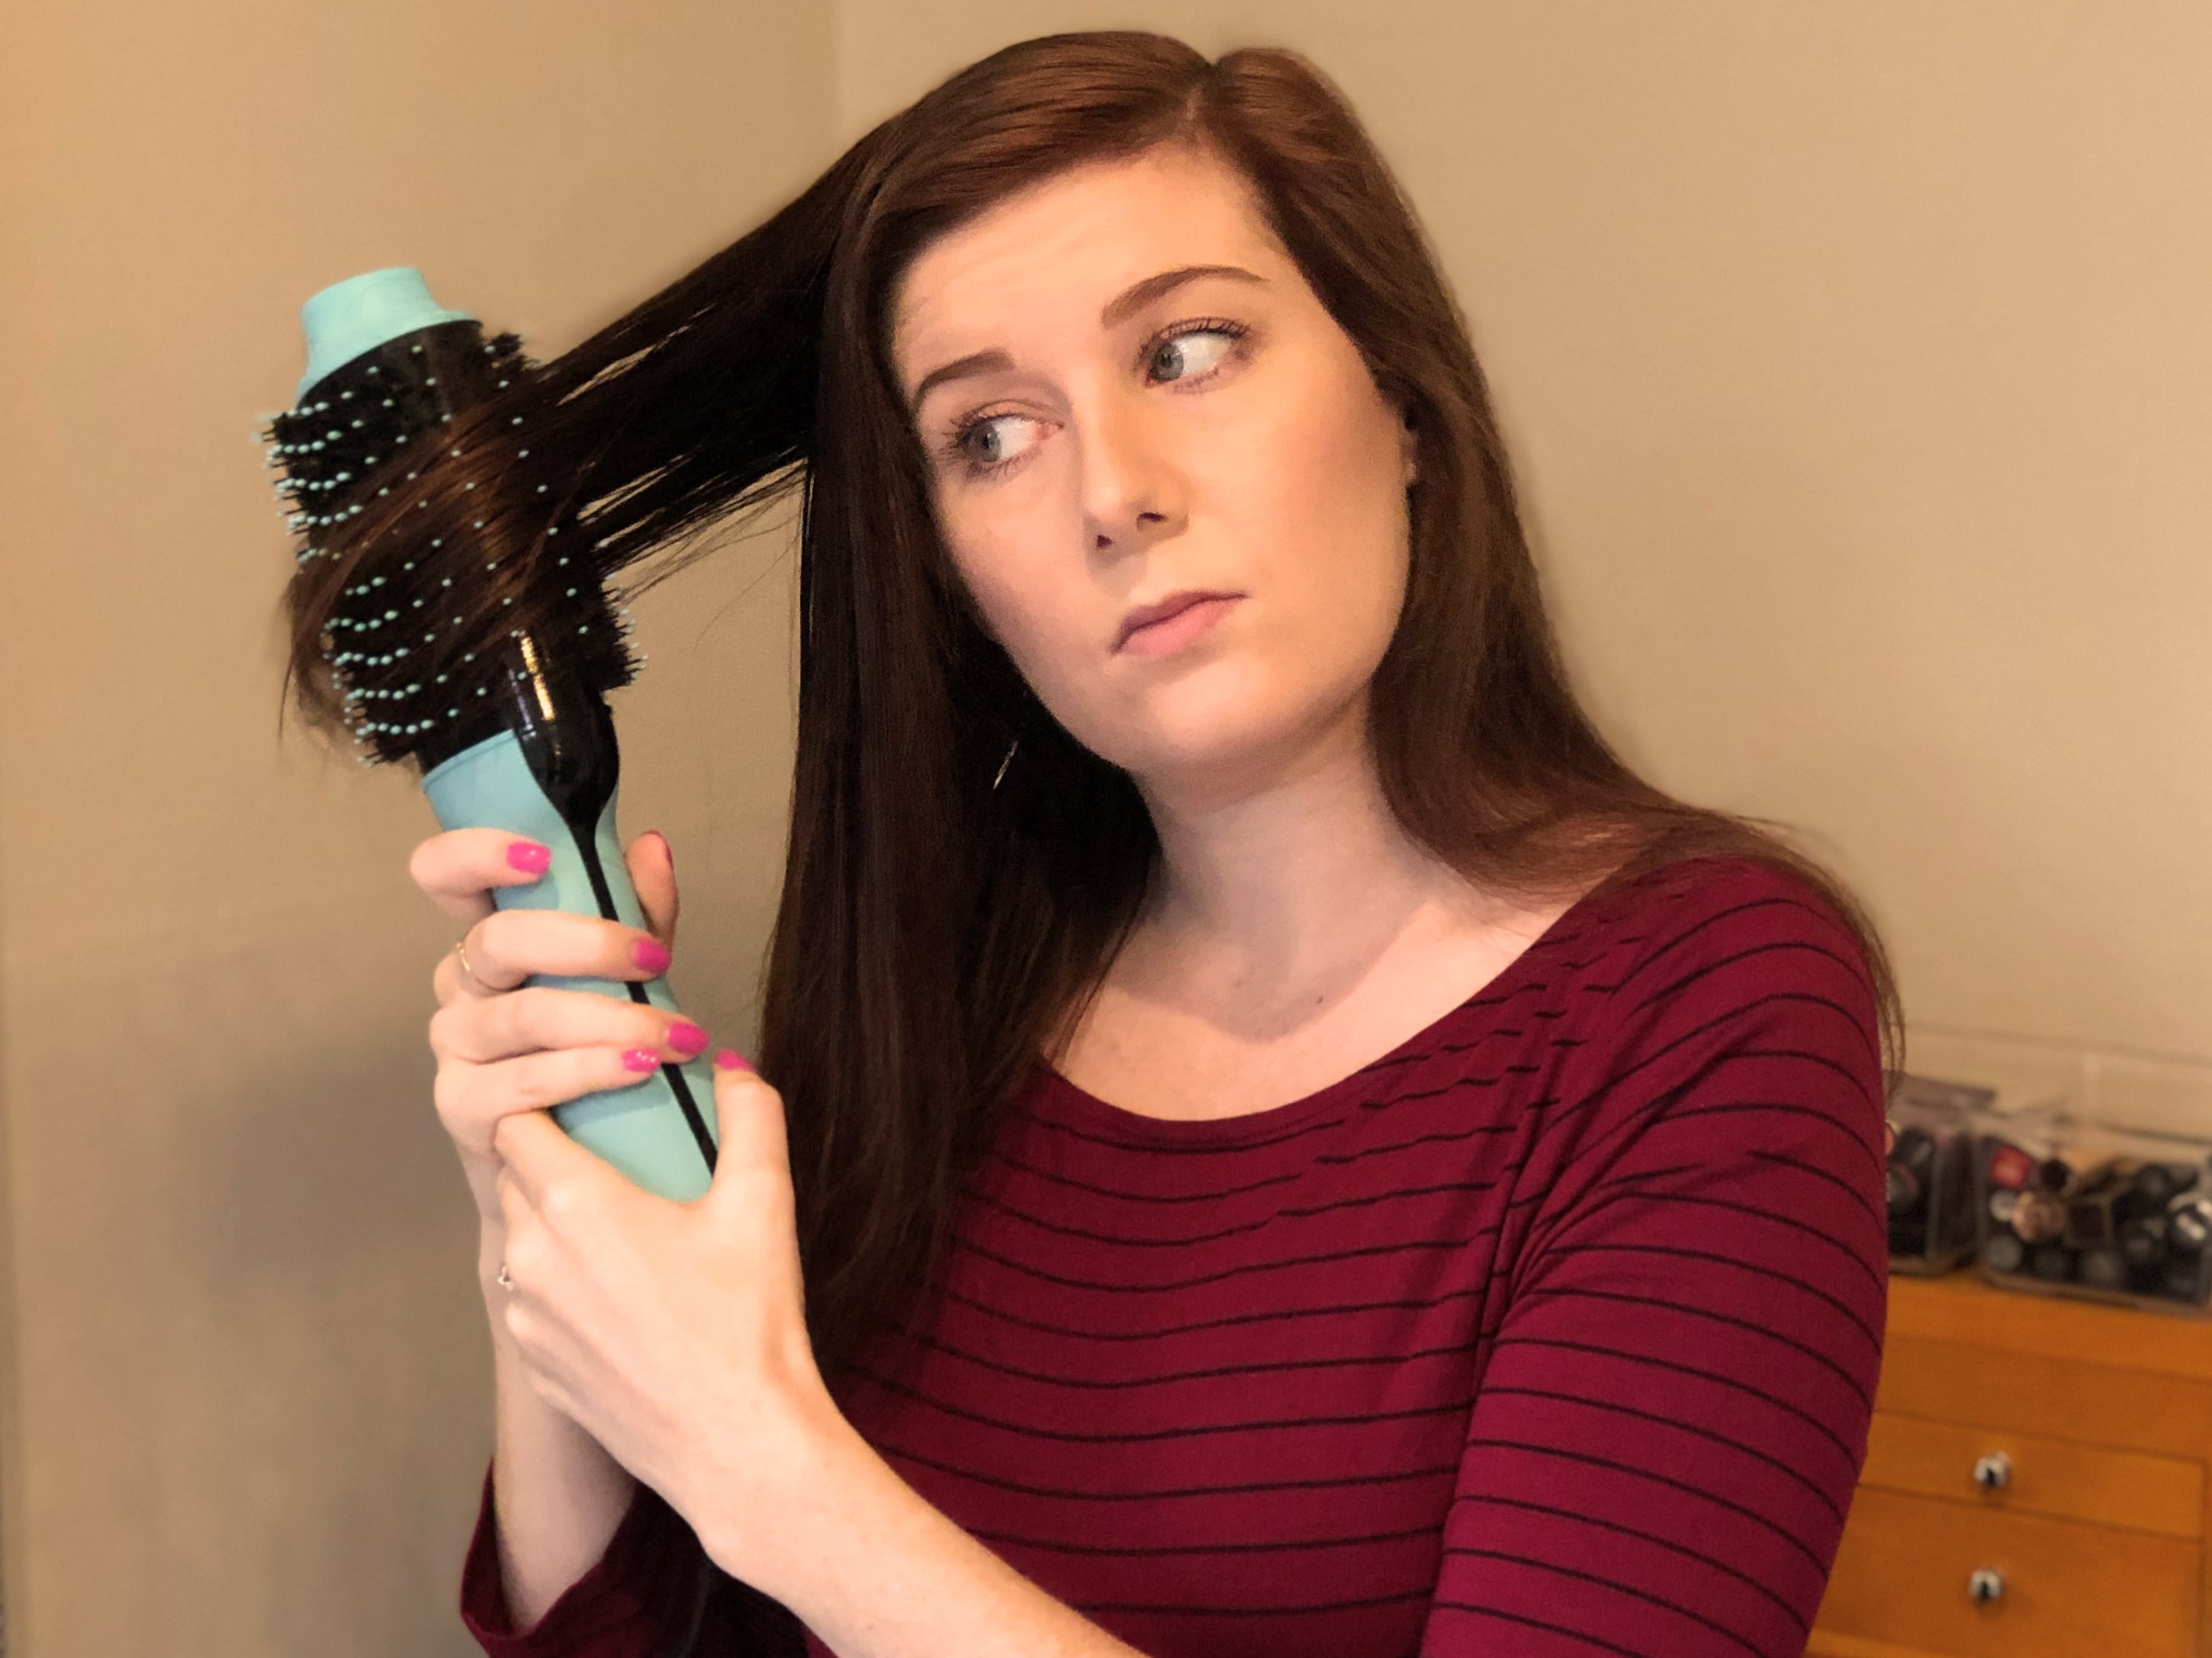 Review: The Revlon One-Step Hot Air Brush Gave My Hair Serious Lift